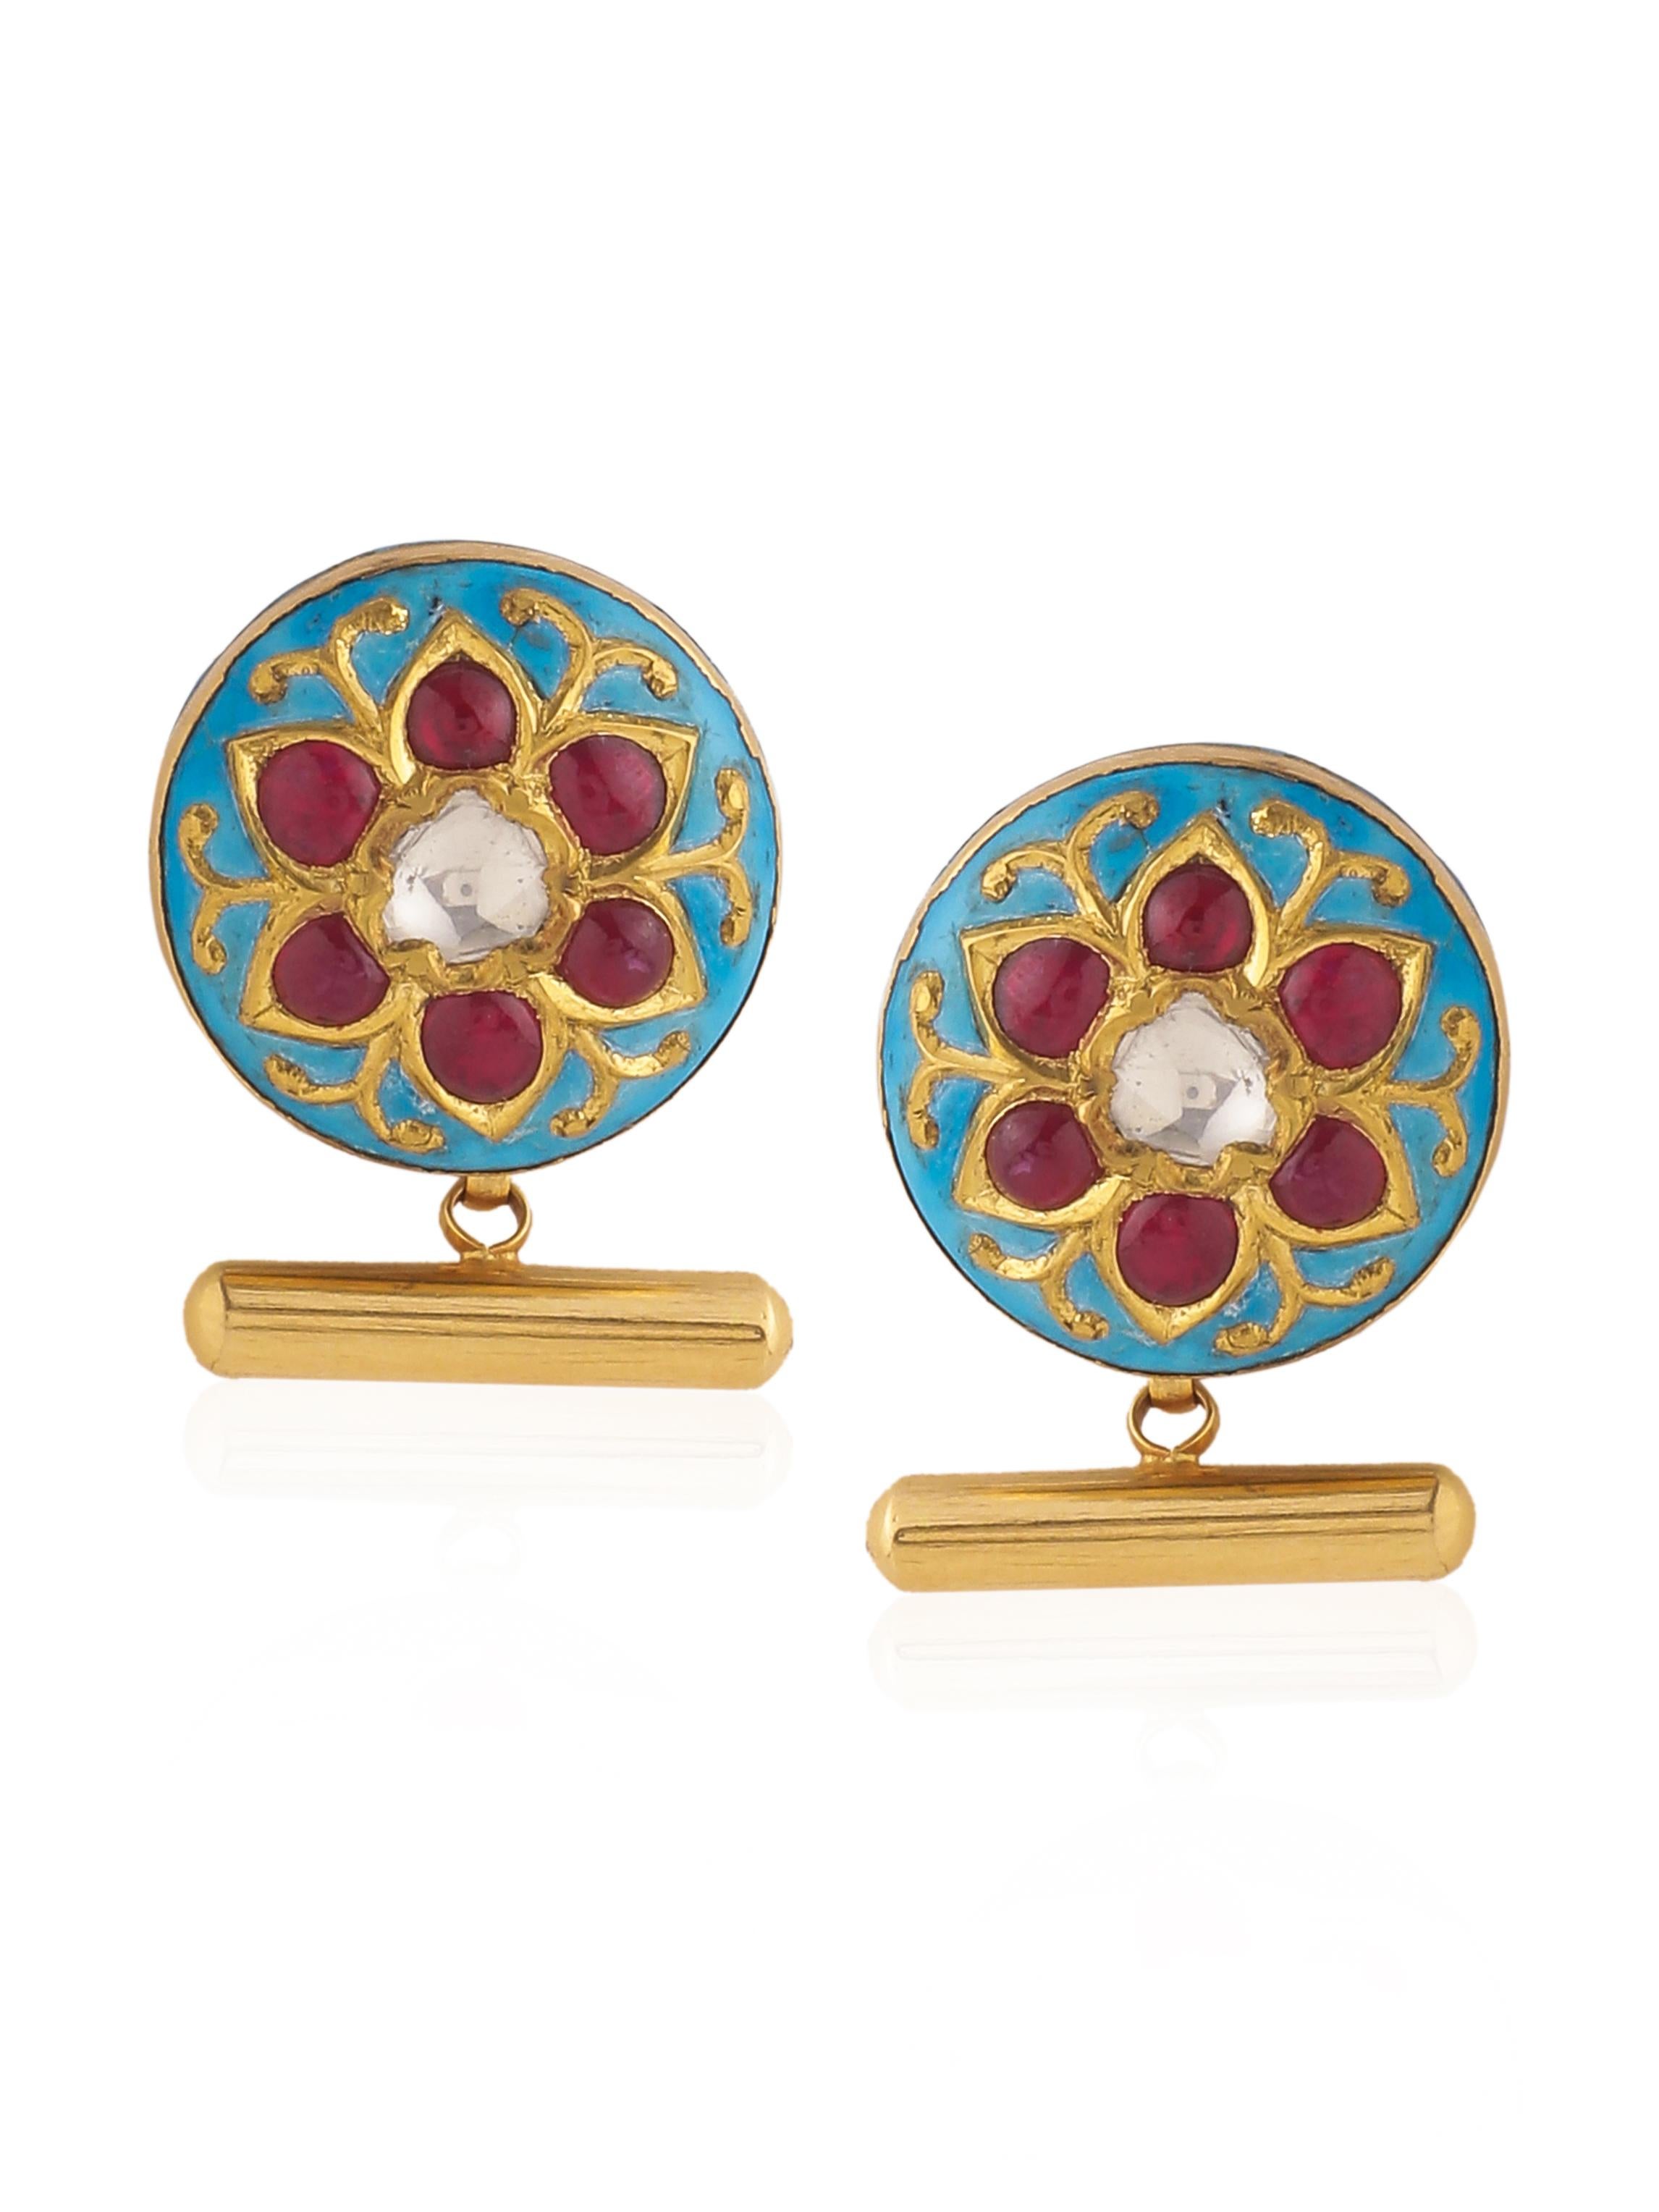 A pair of beautiful cufflinks with diamonds, rubies and fine turquoise and red enamel work.
The flat diamonds in the centre are called 